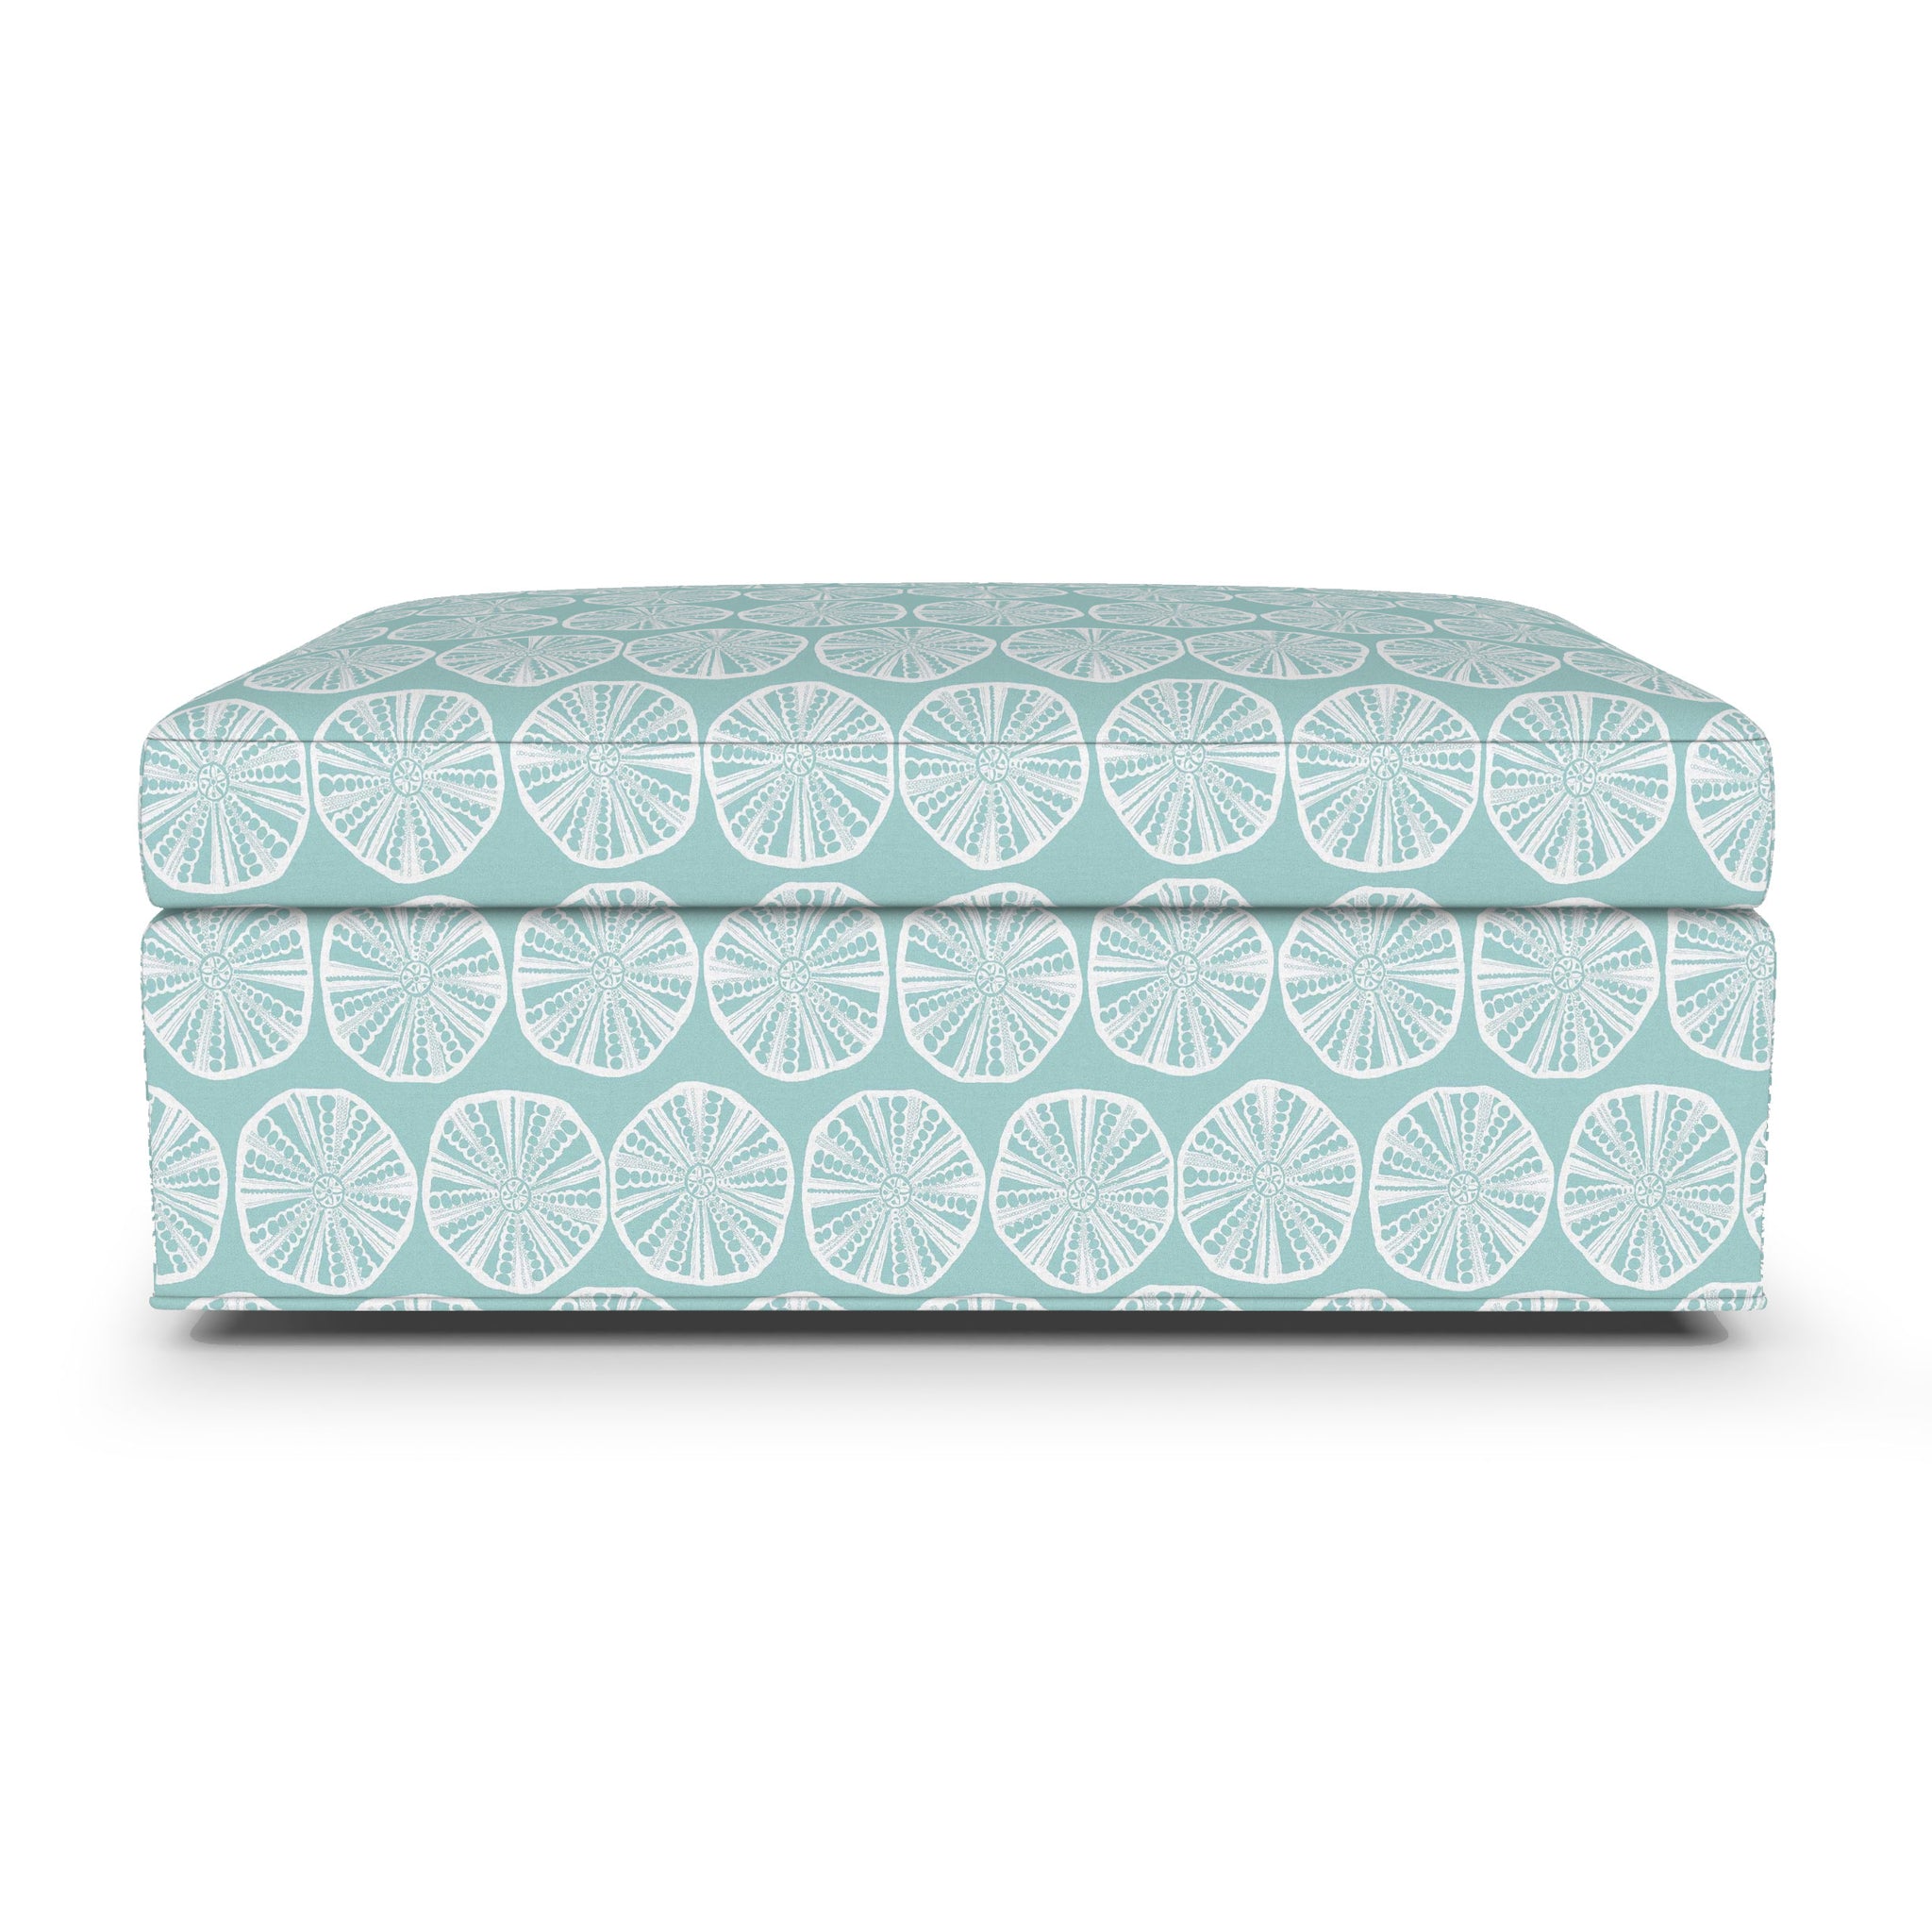 Maine Cottage Milly Storage Ottoman | Traditional Coastal Upholstered Ottoman 